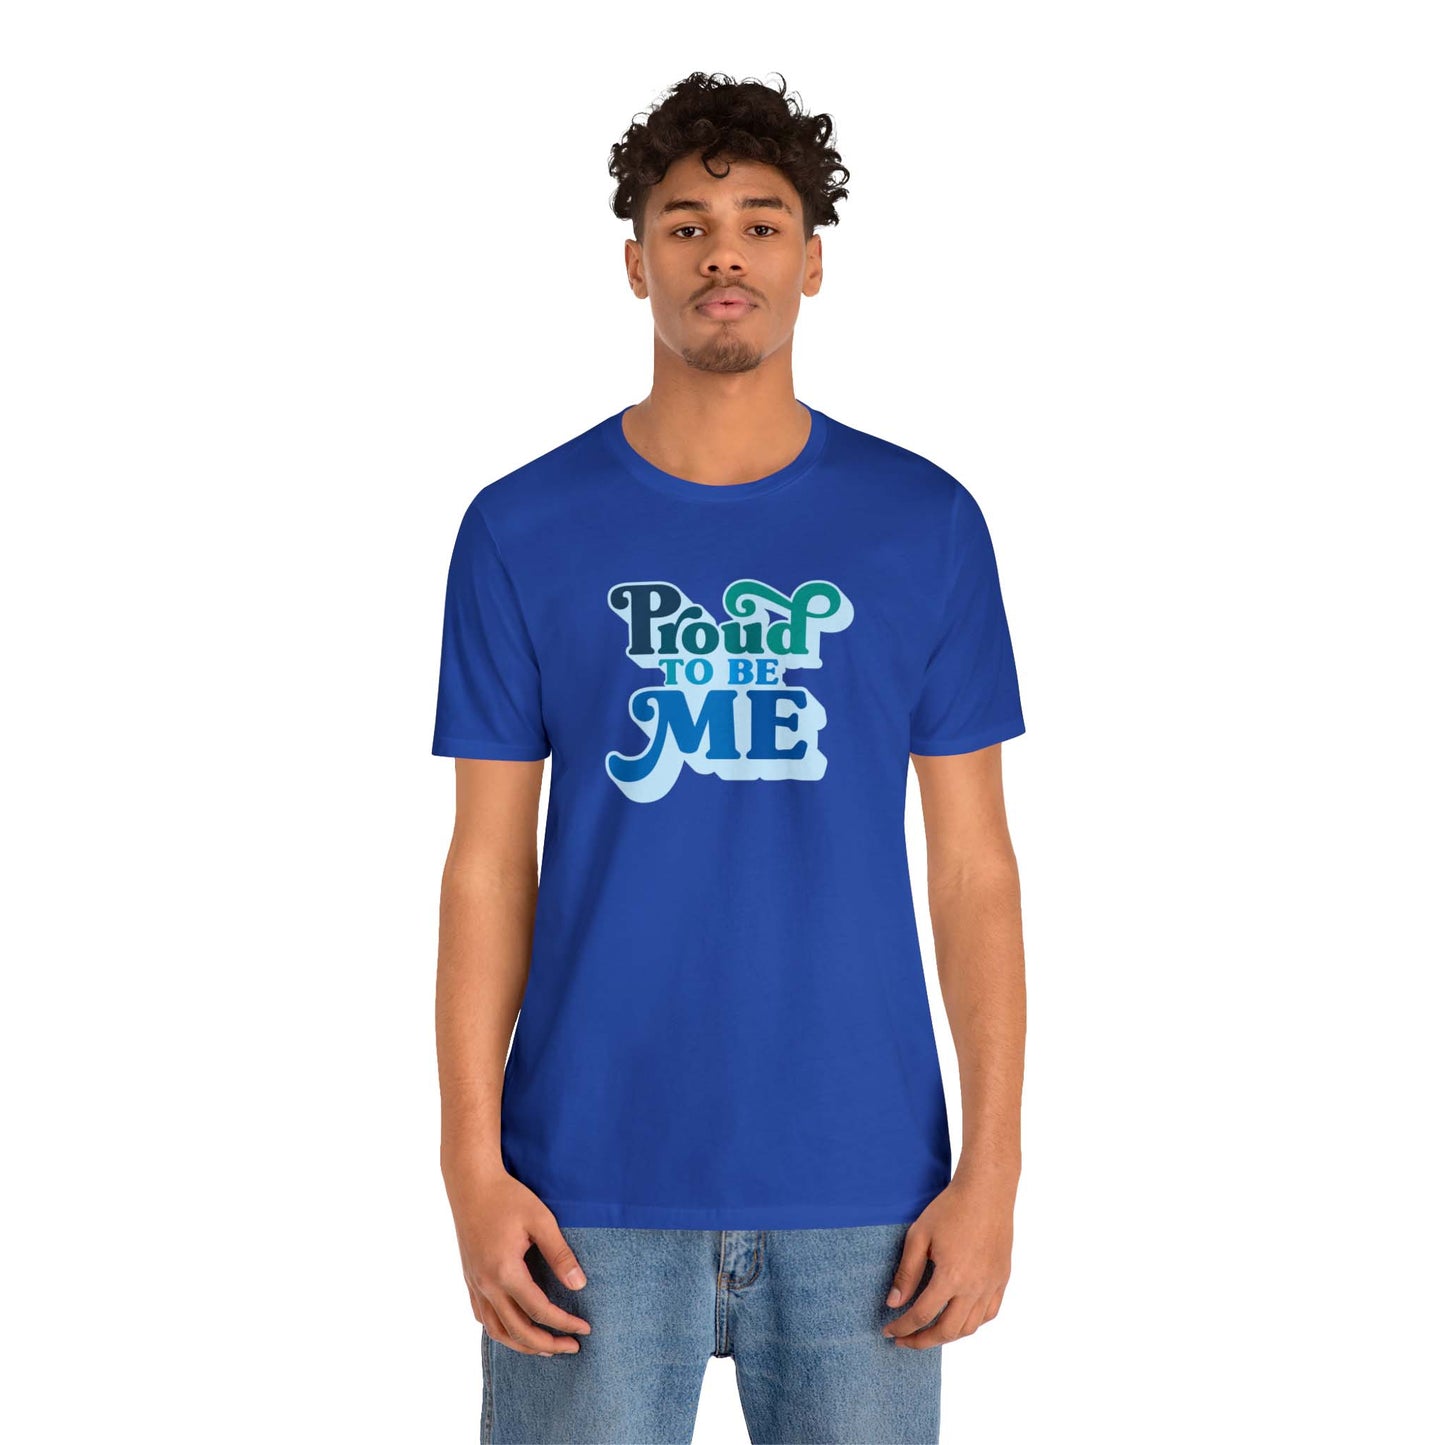 Show off that you are proud of the man you are today! This royal blue T-shirt has our famous PROUD TO BE ME meme printed at the front of the T-shirt.